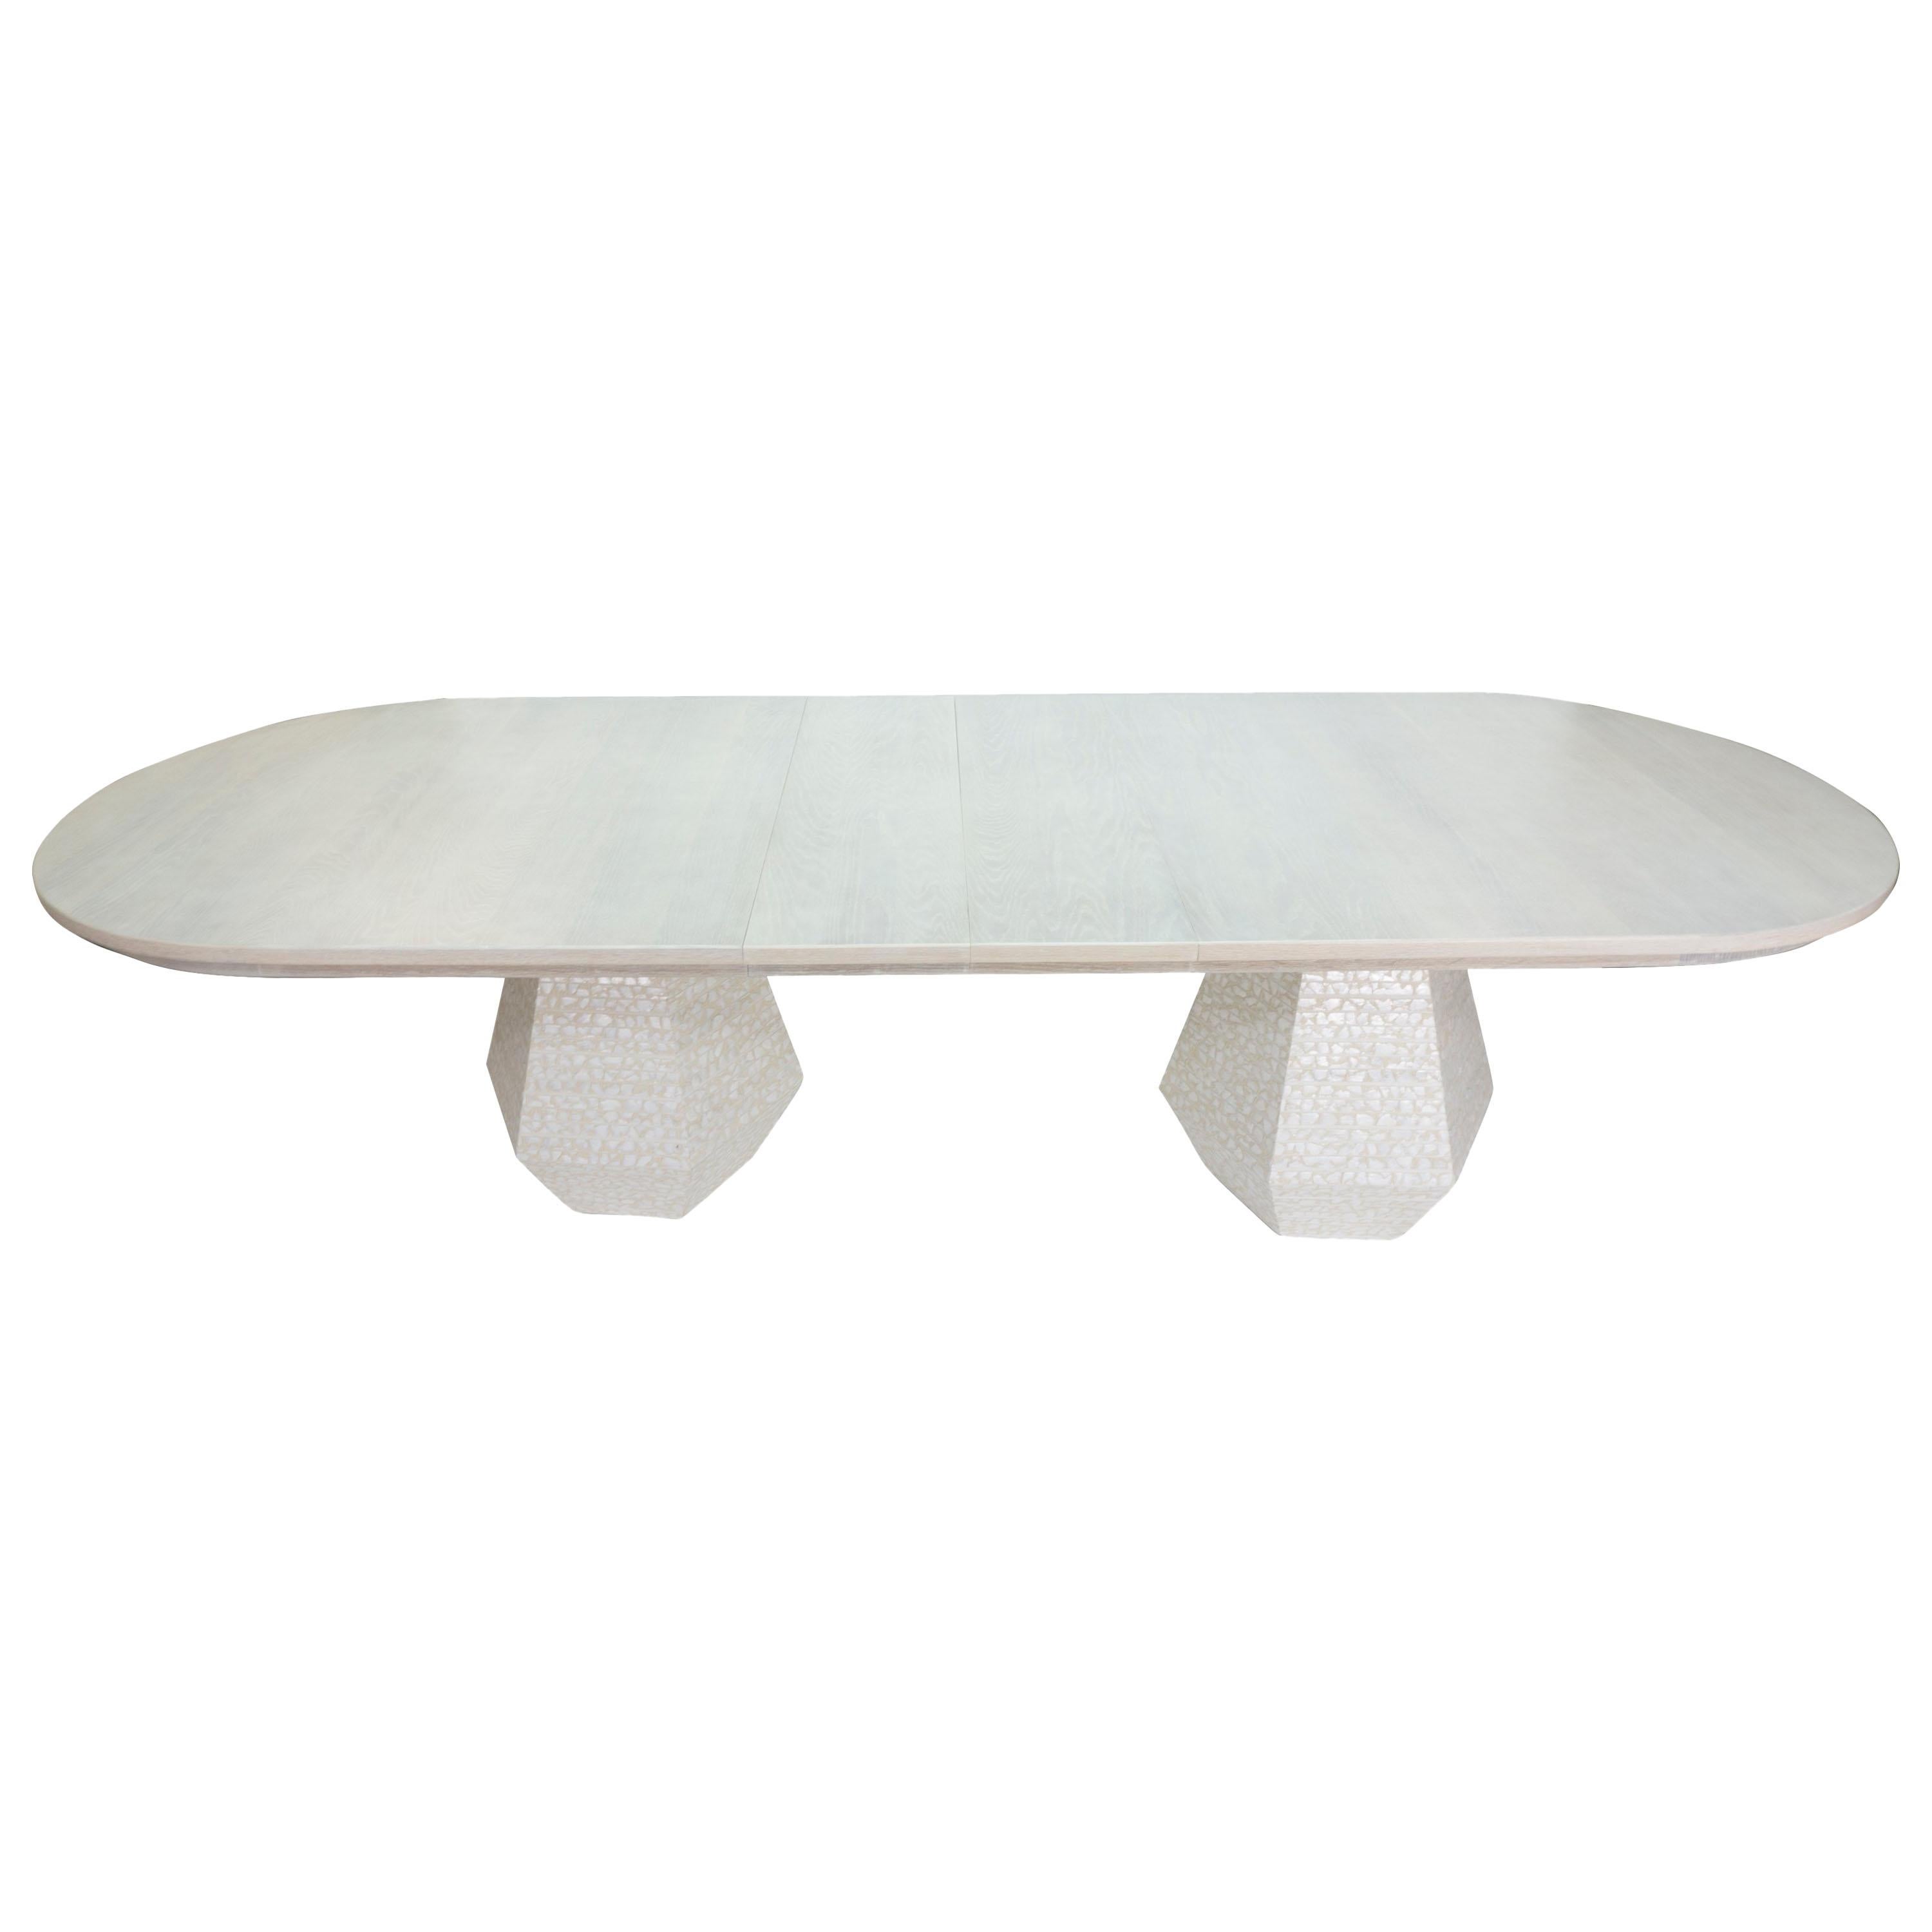 Large Postmodern Dining Table with Extension Leaves